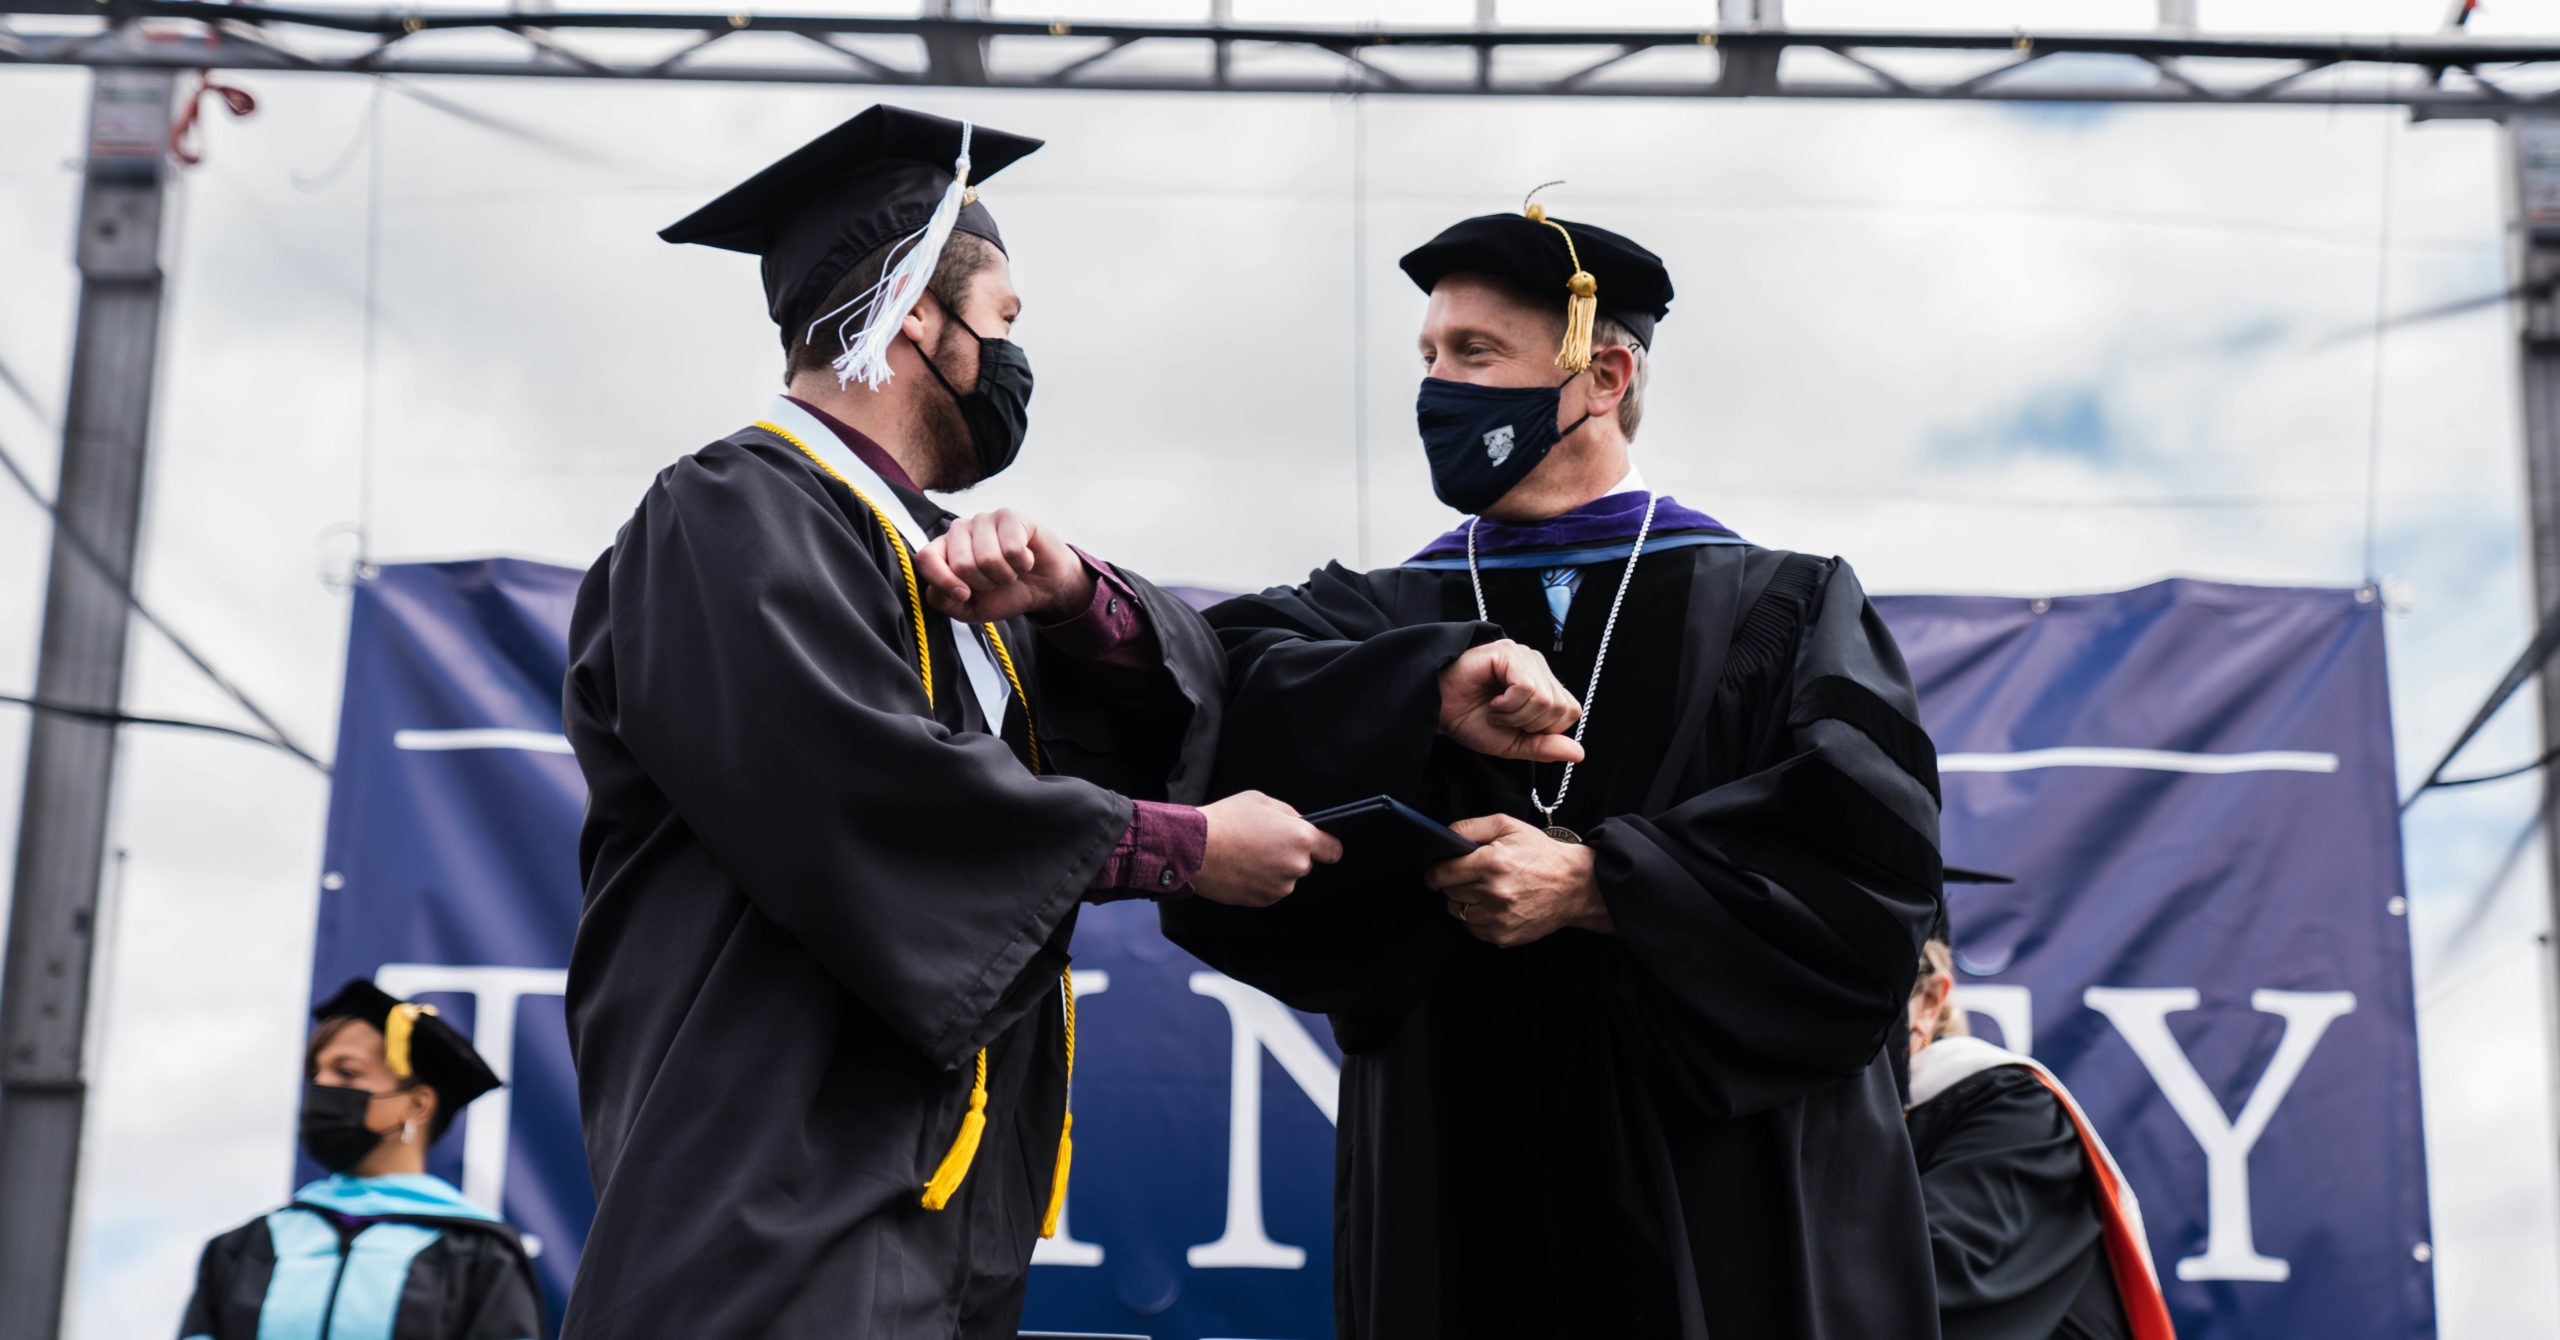 Commencement 2021 - Former President Dykstra awarding student with diploma